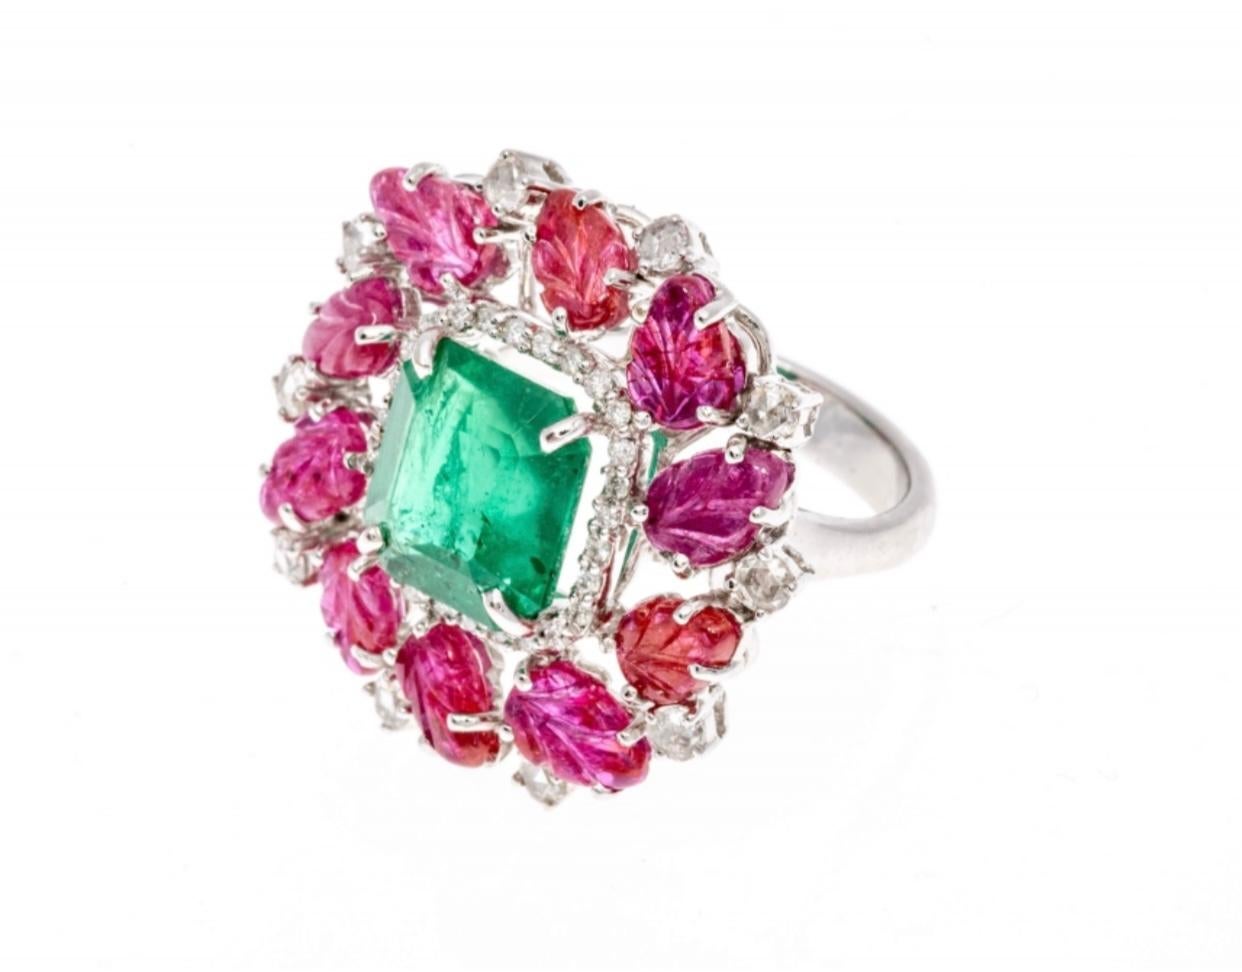 This gorgeous ring contains a center emerald cut faceted, clear medium to light green emerald, approximately 3.65 CTS, surrounded by round faceted diamonds, approximately 0.007 TCW and prong set. Surrounding the center emerald and diamonds, is a